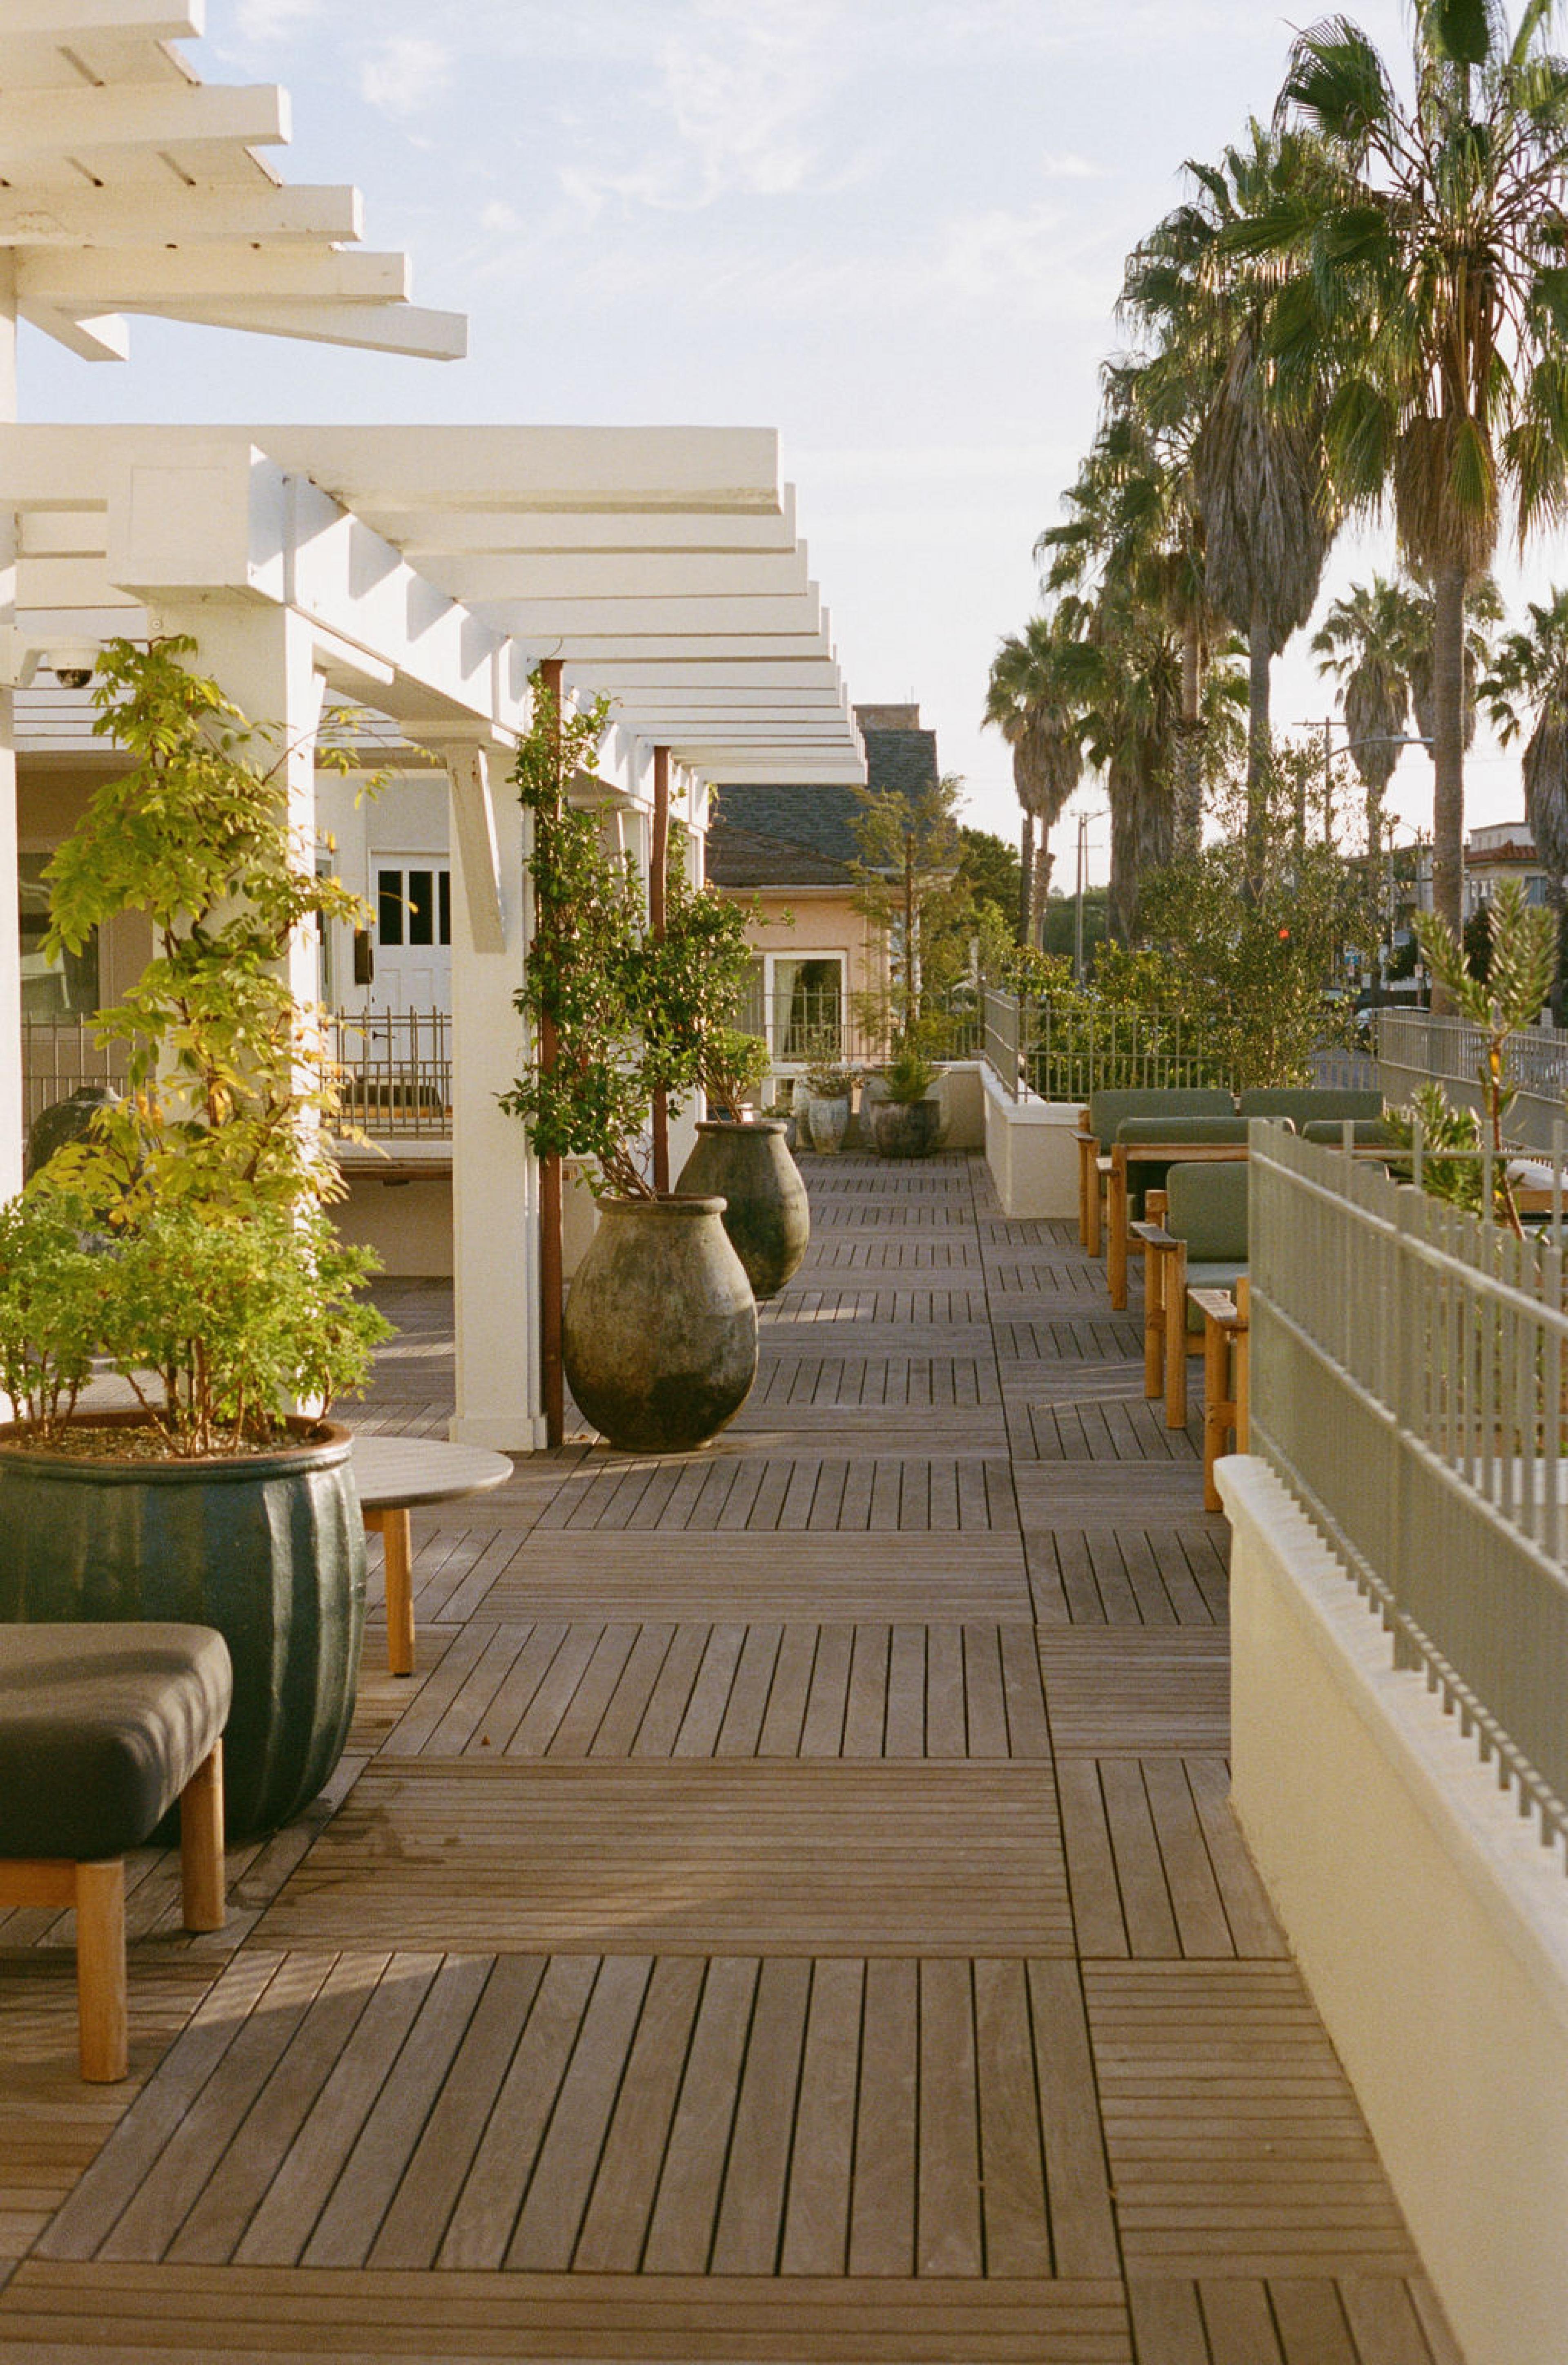 hotel rooftop with wooden floor and plantings in planter boxes and palm trees in a line to the right of rooftop